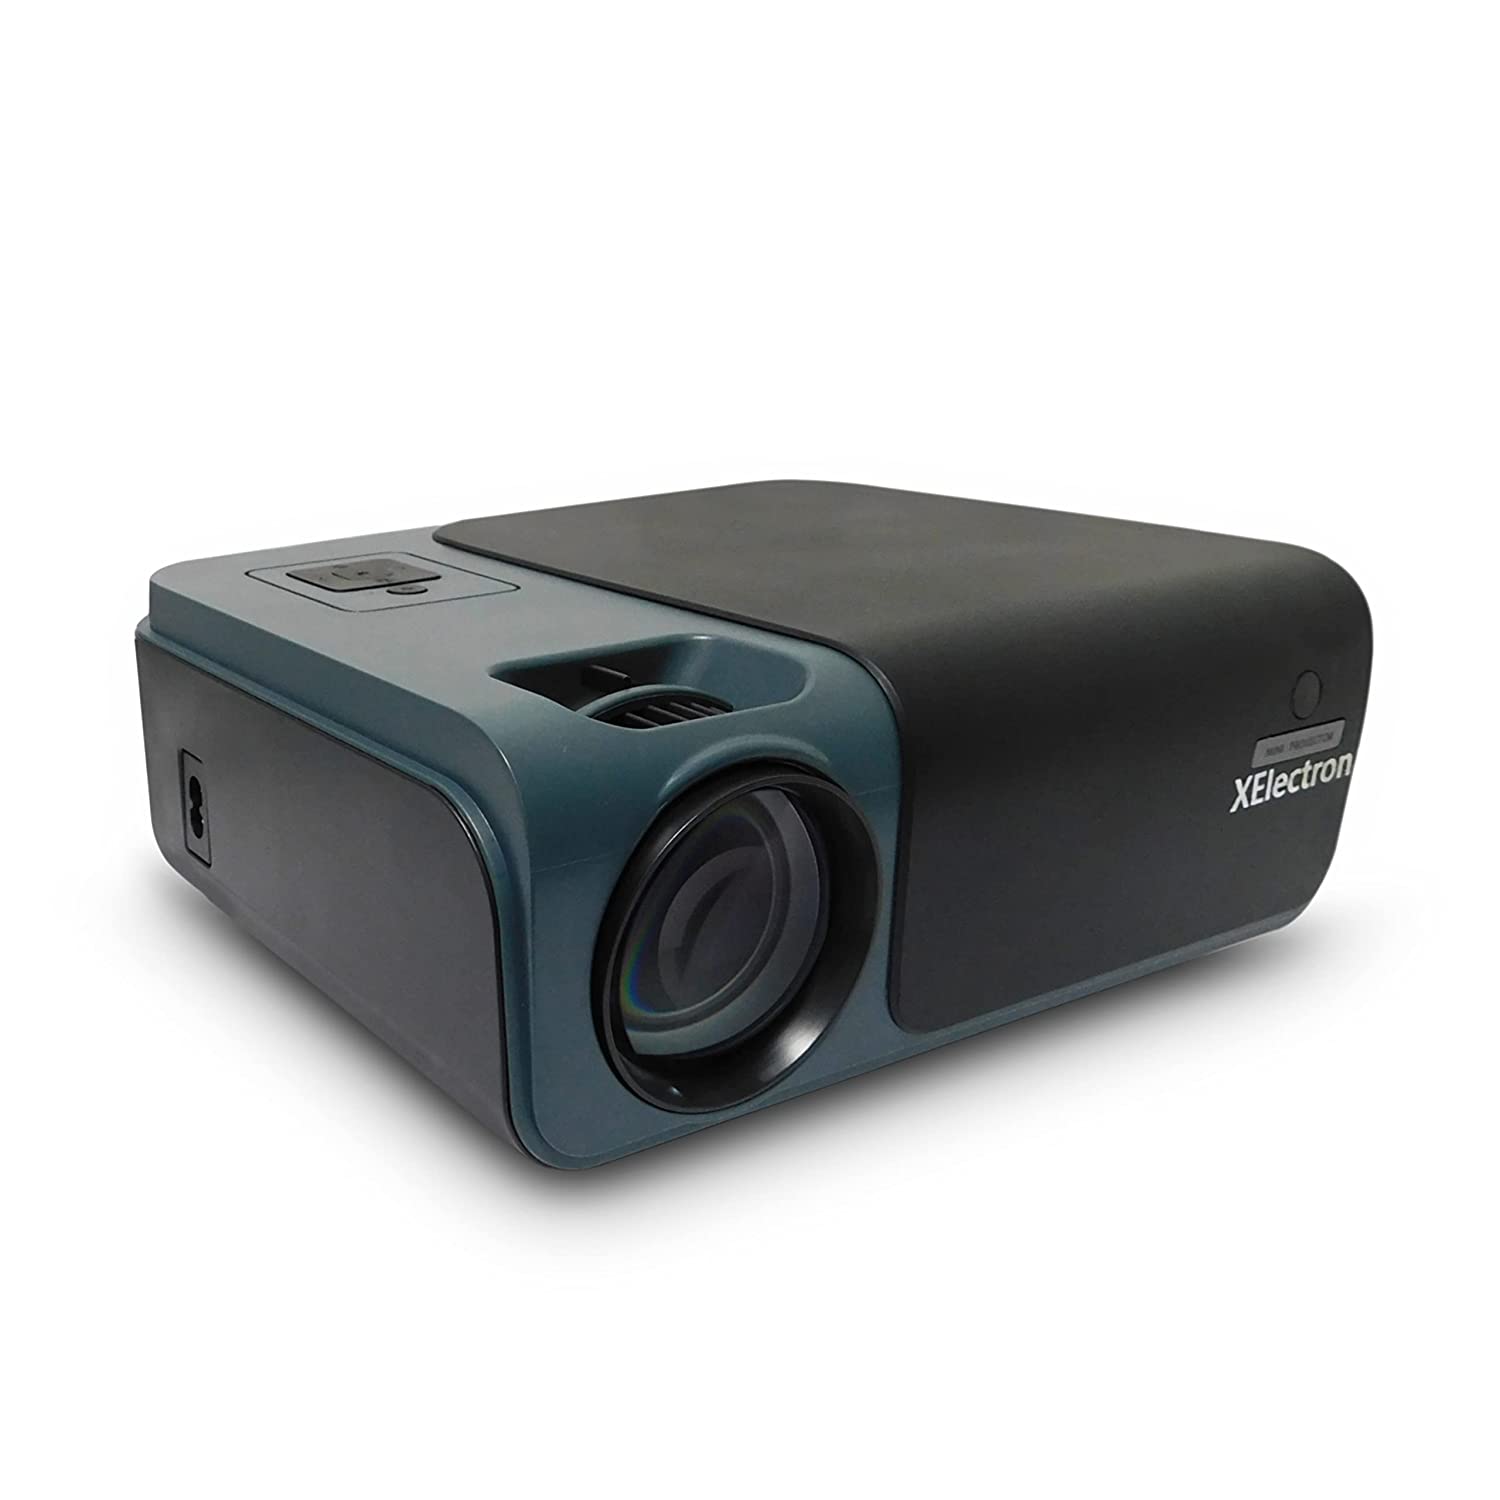 C50 WiFi Bluetooth Projector 7500 Lumens Real Full HD 1080P Resolution, 300  inch Display 4K Support XElectron